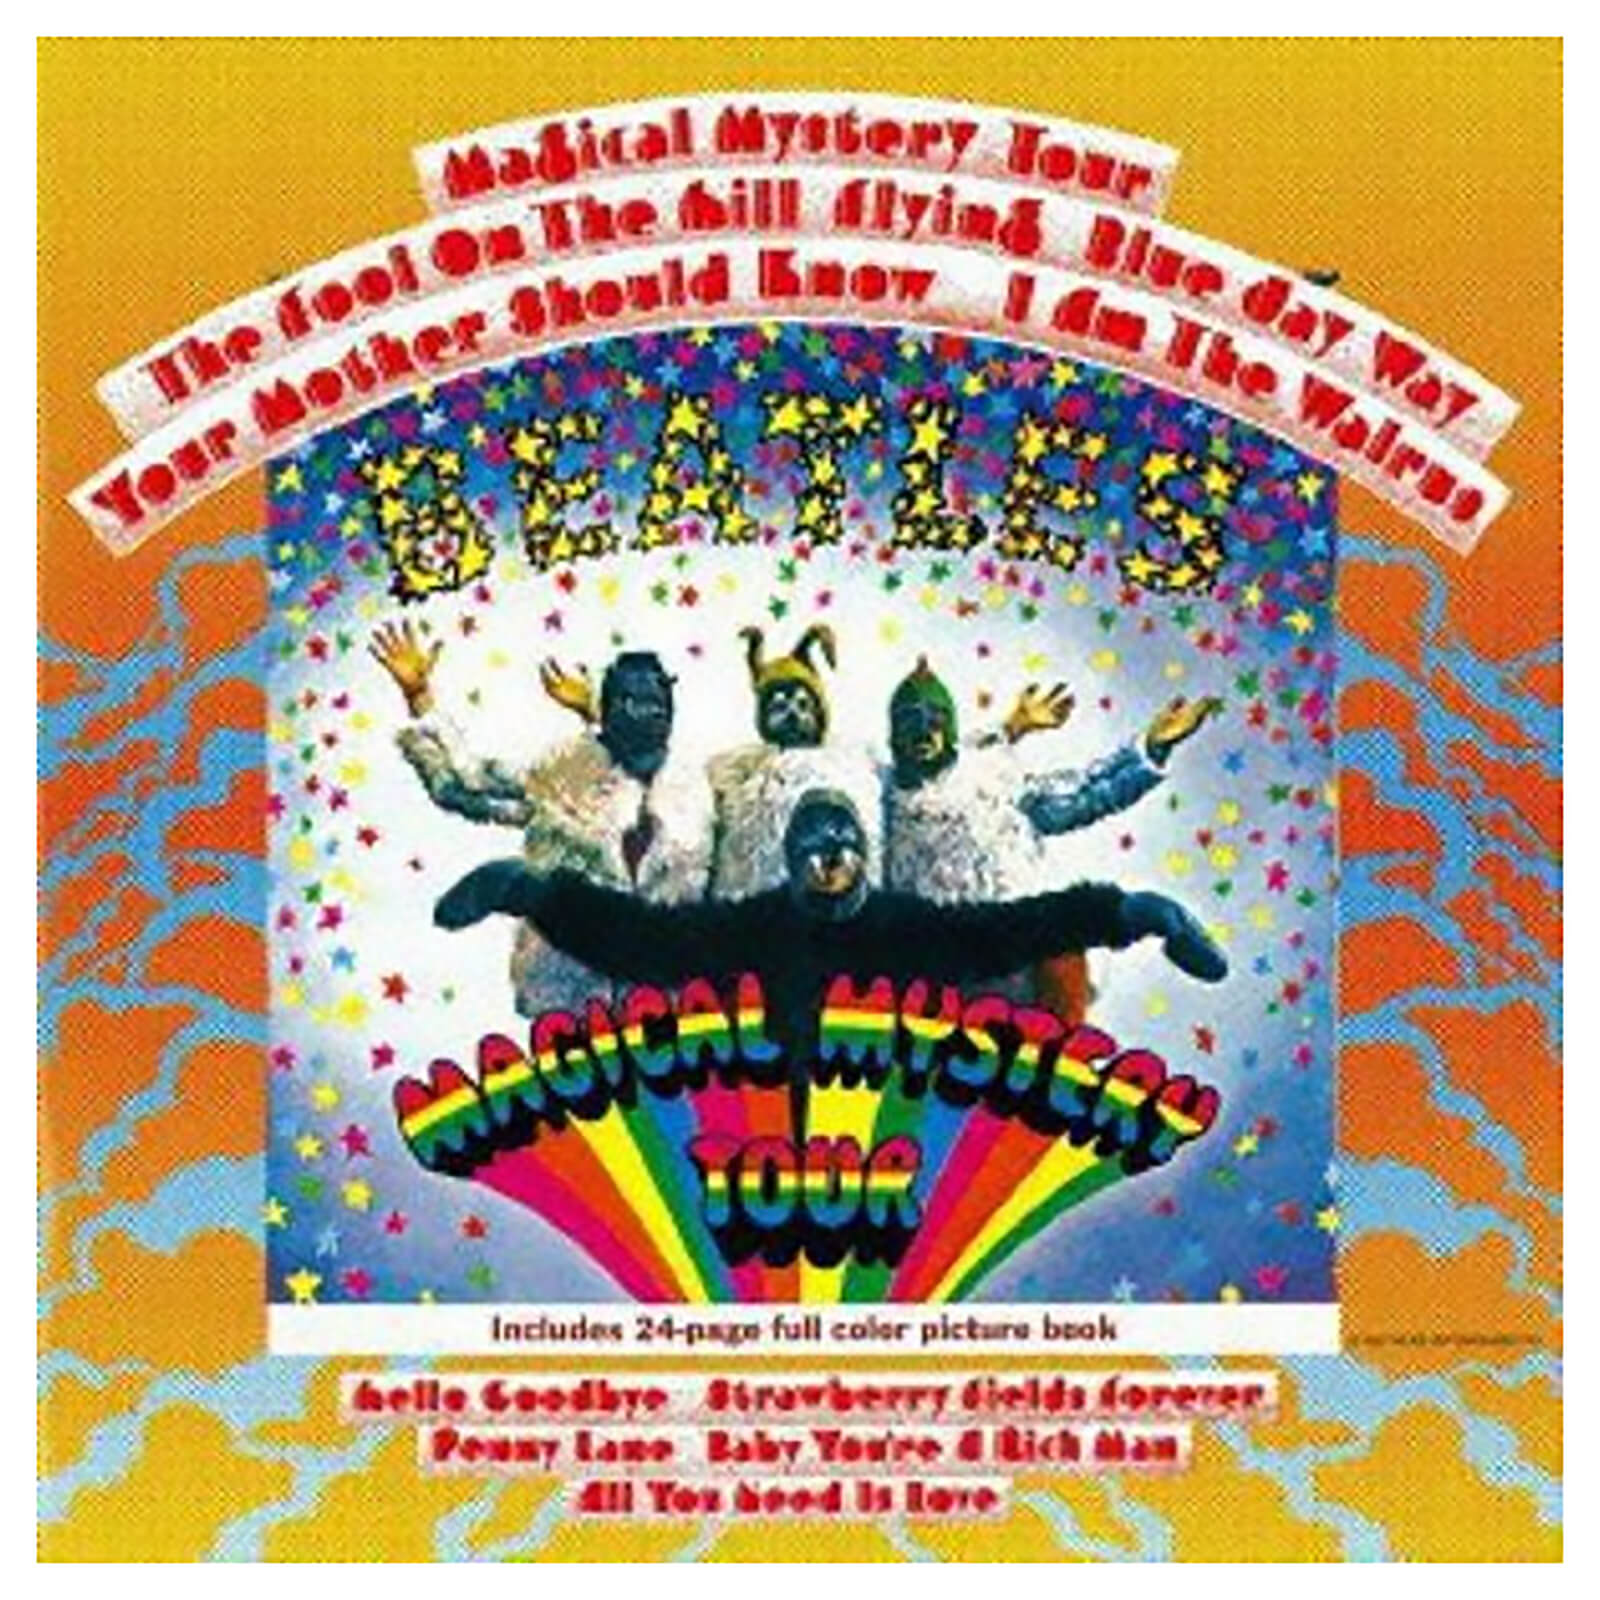 The Beatles - Magical Mystery Tour 180g LP